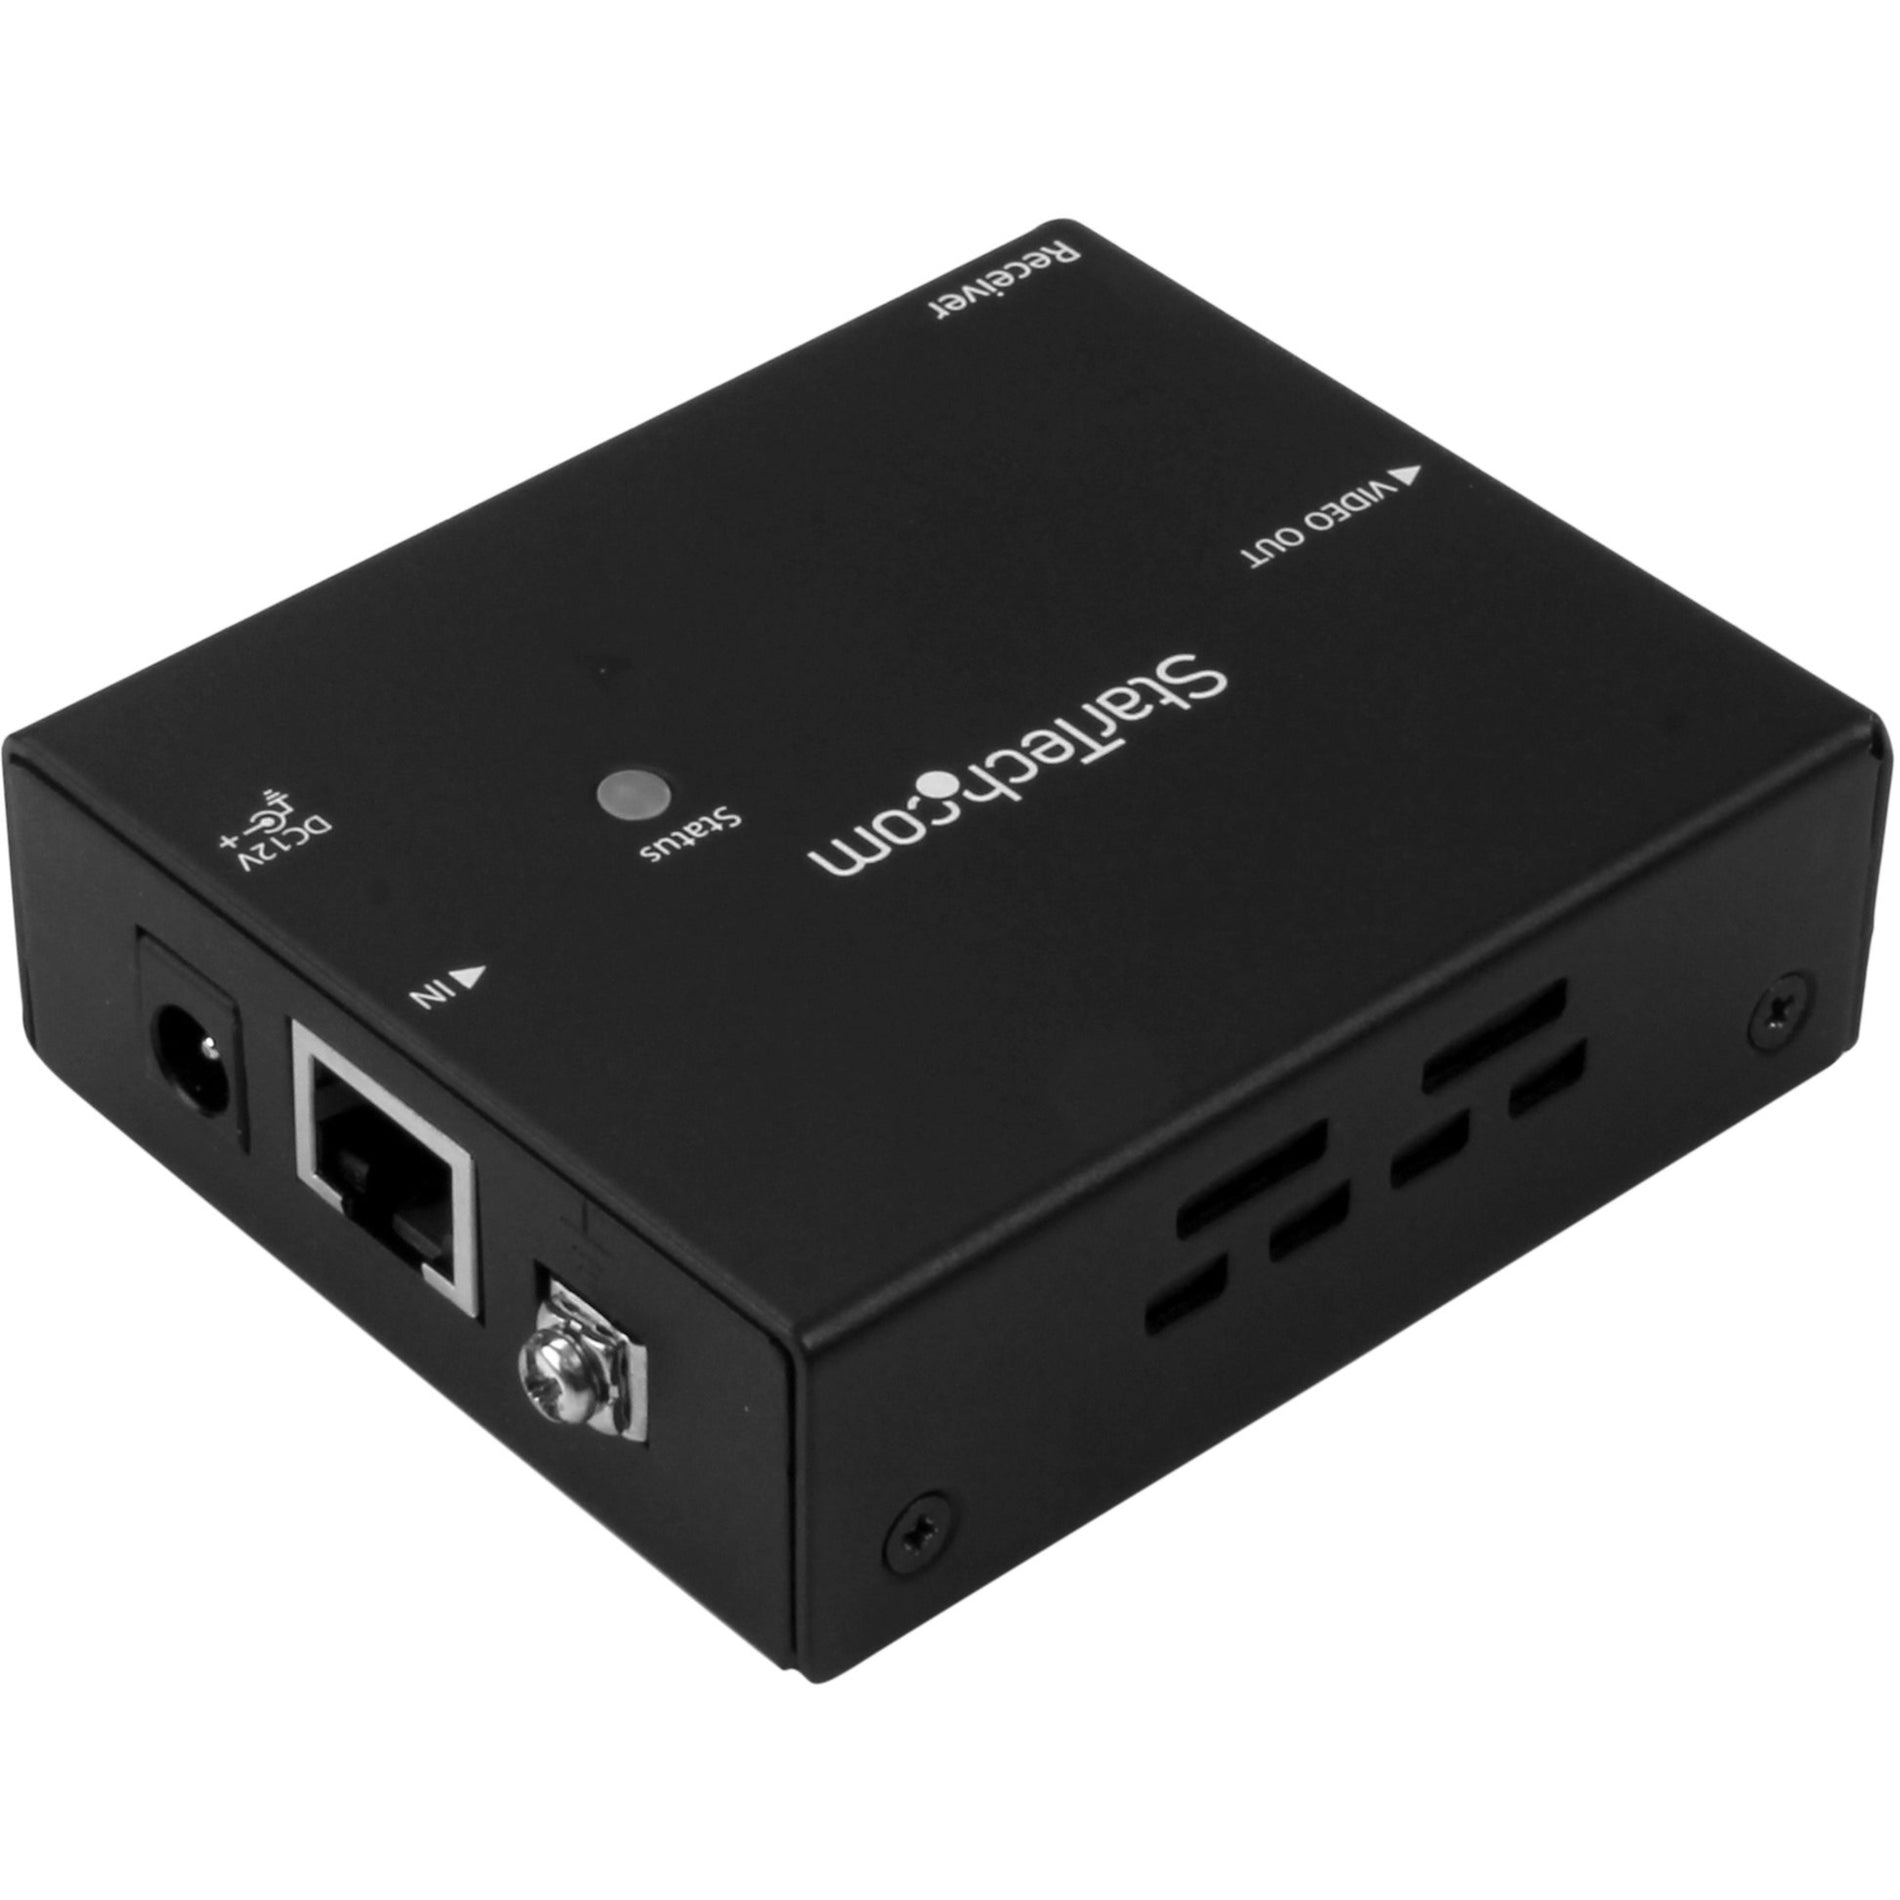 StarTech.com STDHVHDBT Multi-Input HDBaseT Extender with Built-in Switch - DisplayPort VGA and HDMI Over CAT5 or CAT6 - Up to 4K, up to 230 ft